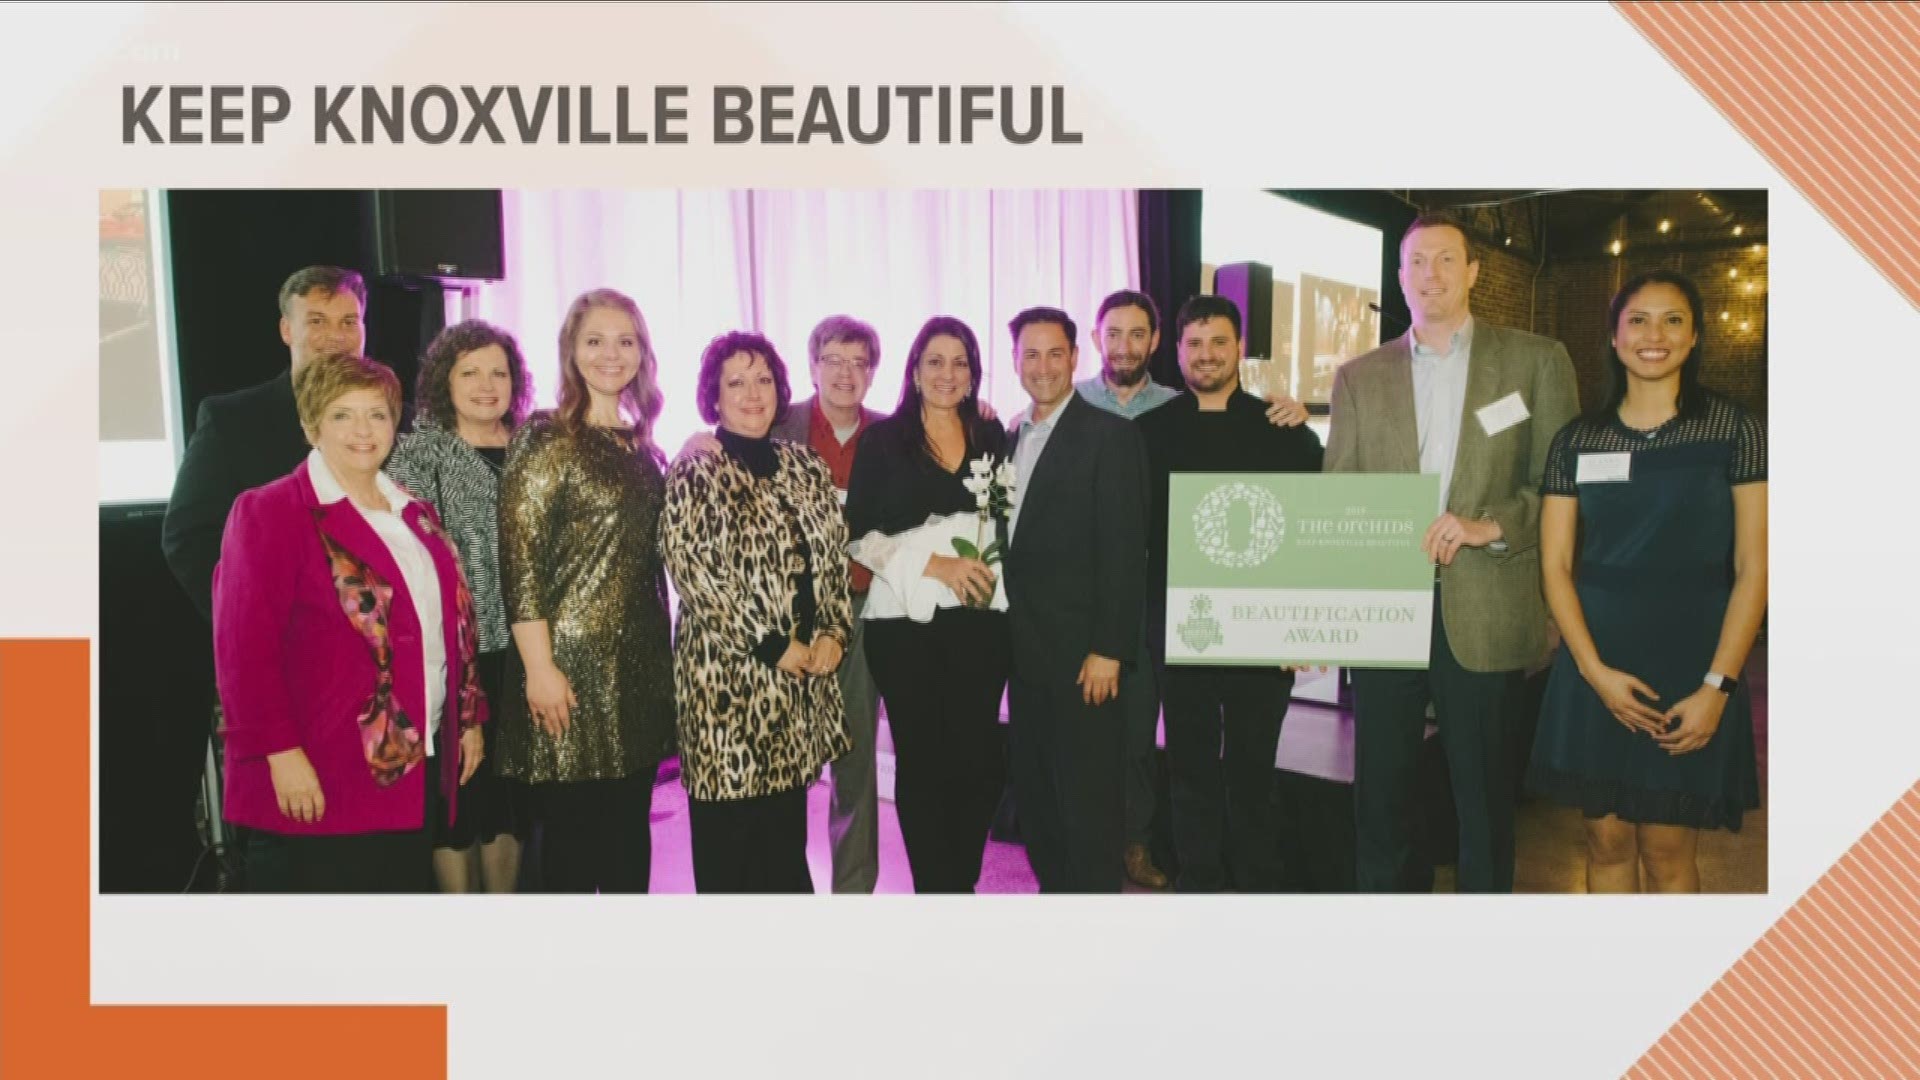 Keep Knoxville Beautiful's "orchid awards" honor some of the most beautiful locations in our area.